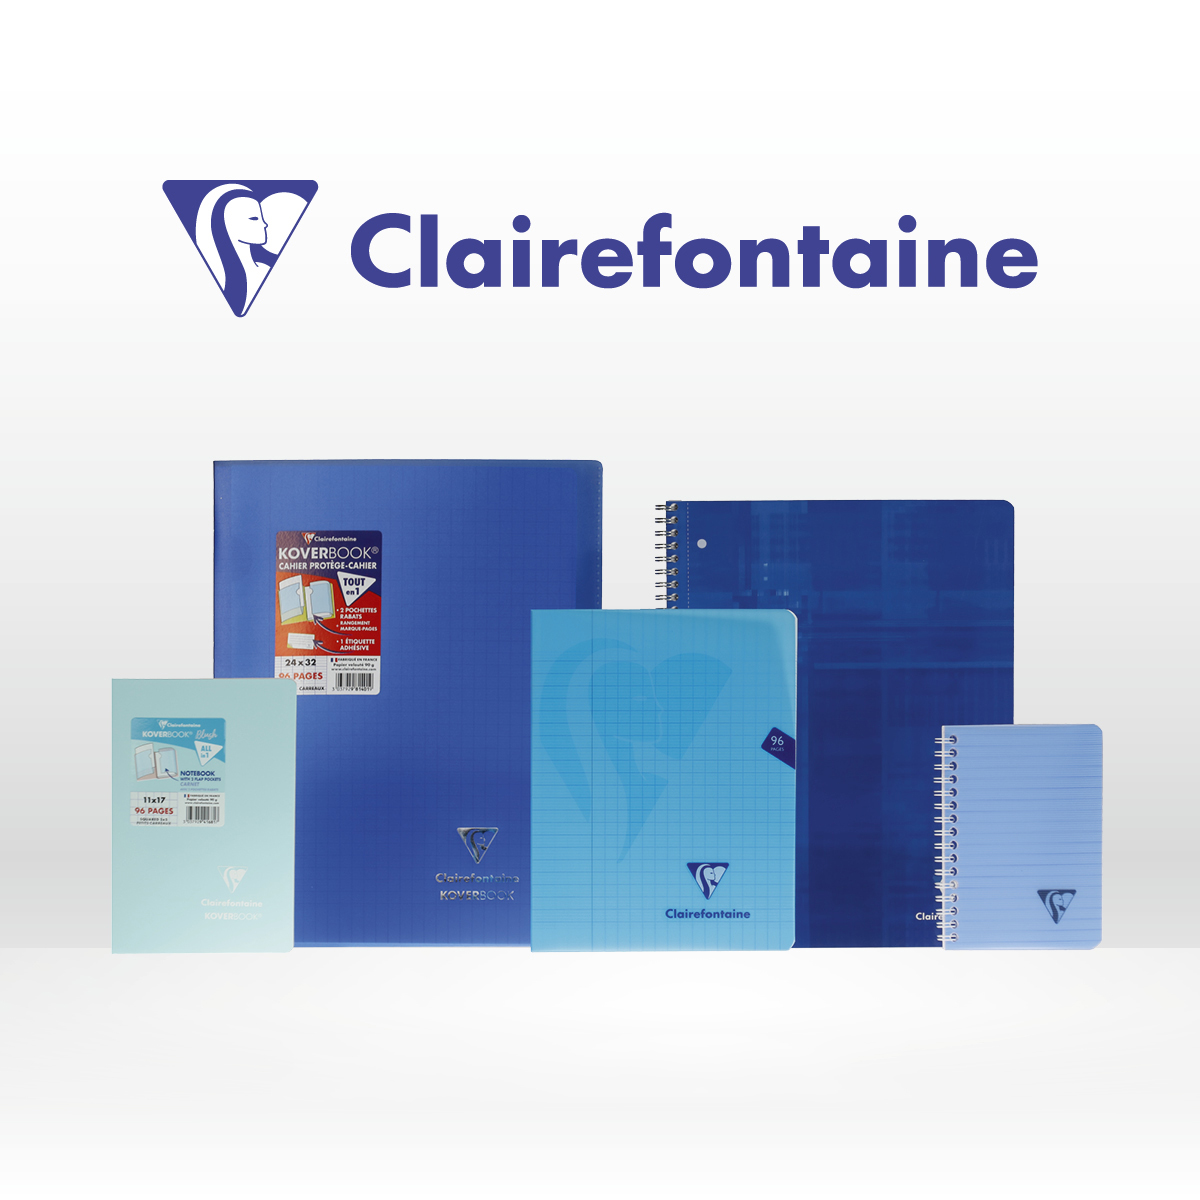 24 x 32 cm 12 Sheets Clairefontaine Grained Drawing Paper 180 g 